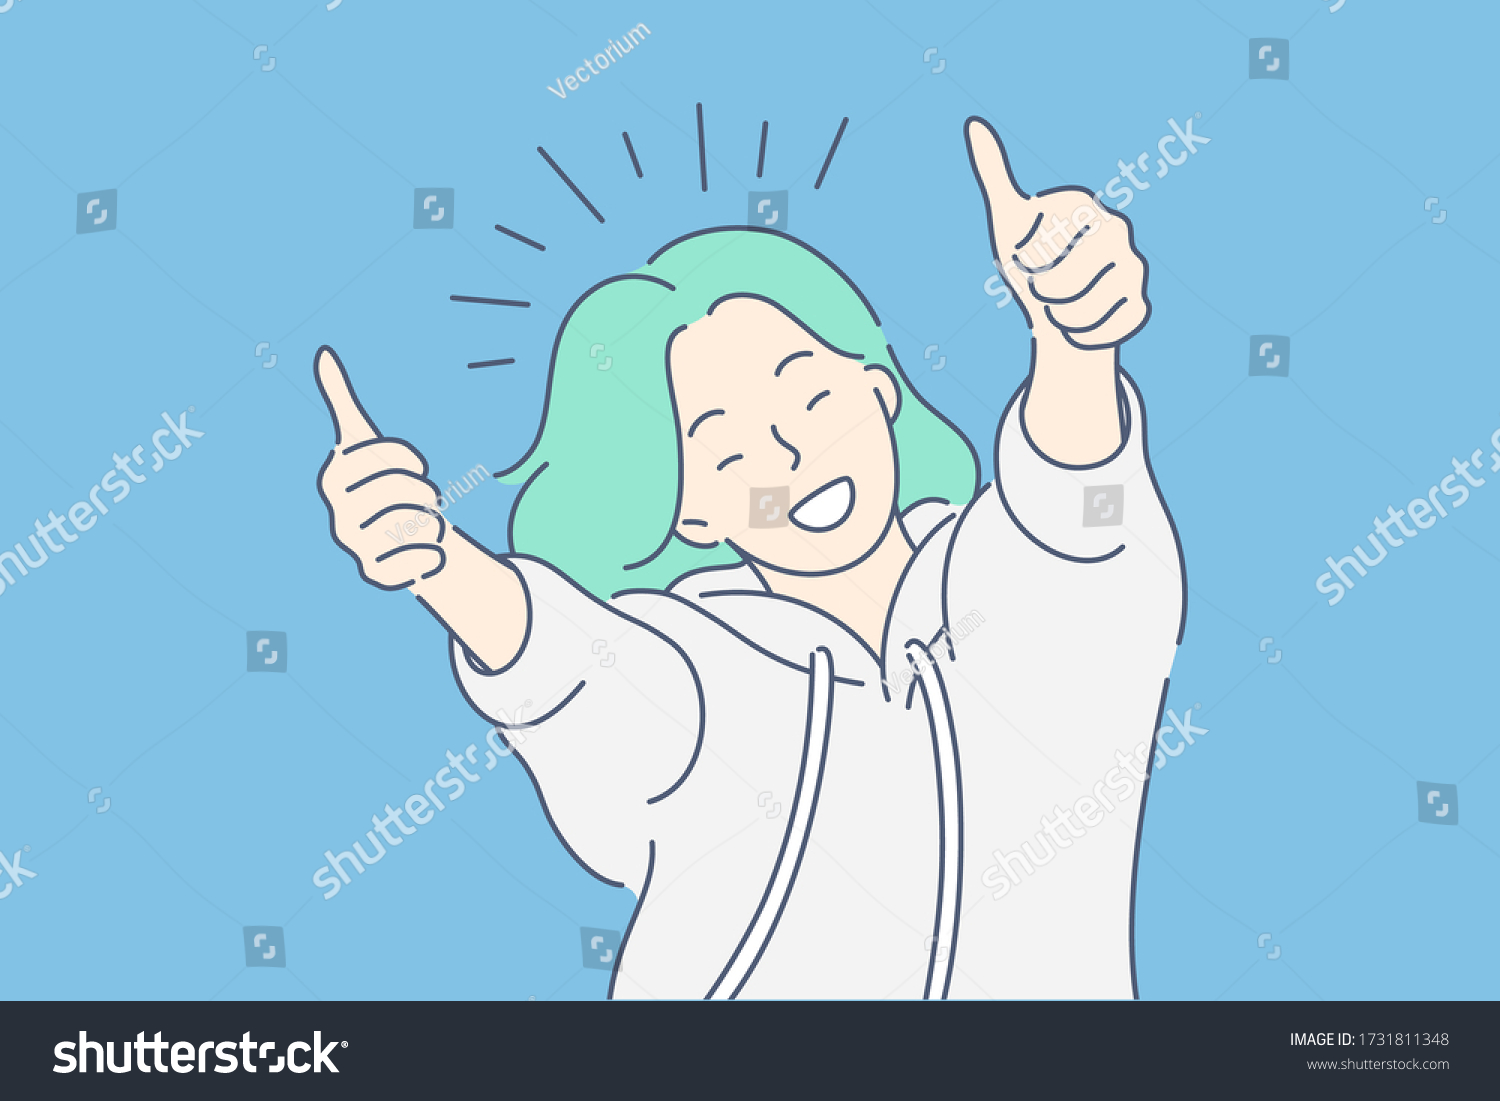 Like sign, joy, approval, happiness concept. Young happy smiling woman or girl teenager cartoon character showing thumbs up. Success and goal achievement facial expression flat vector illustration. #1731811348